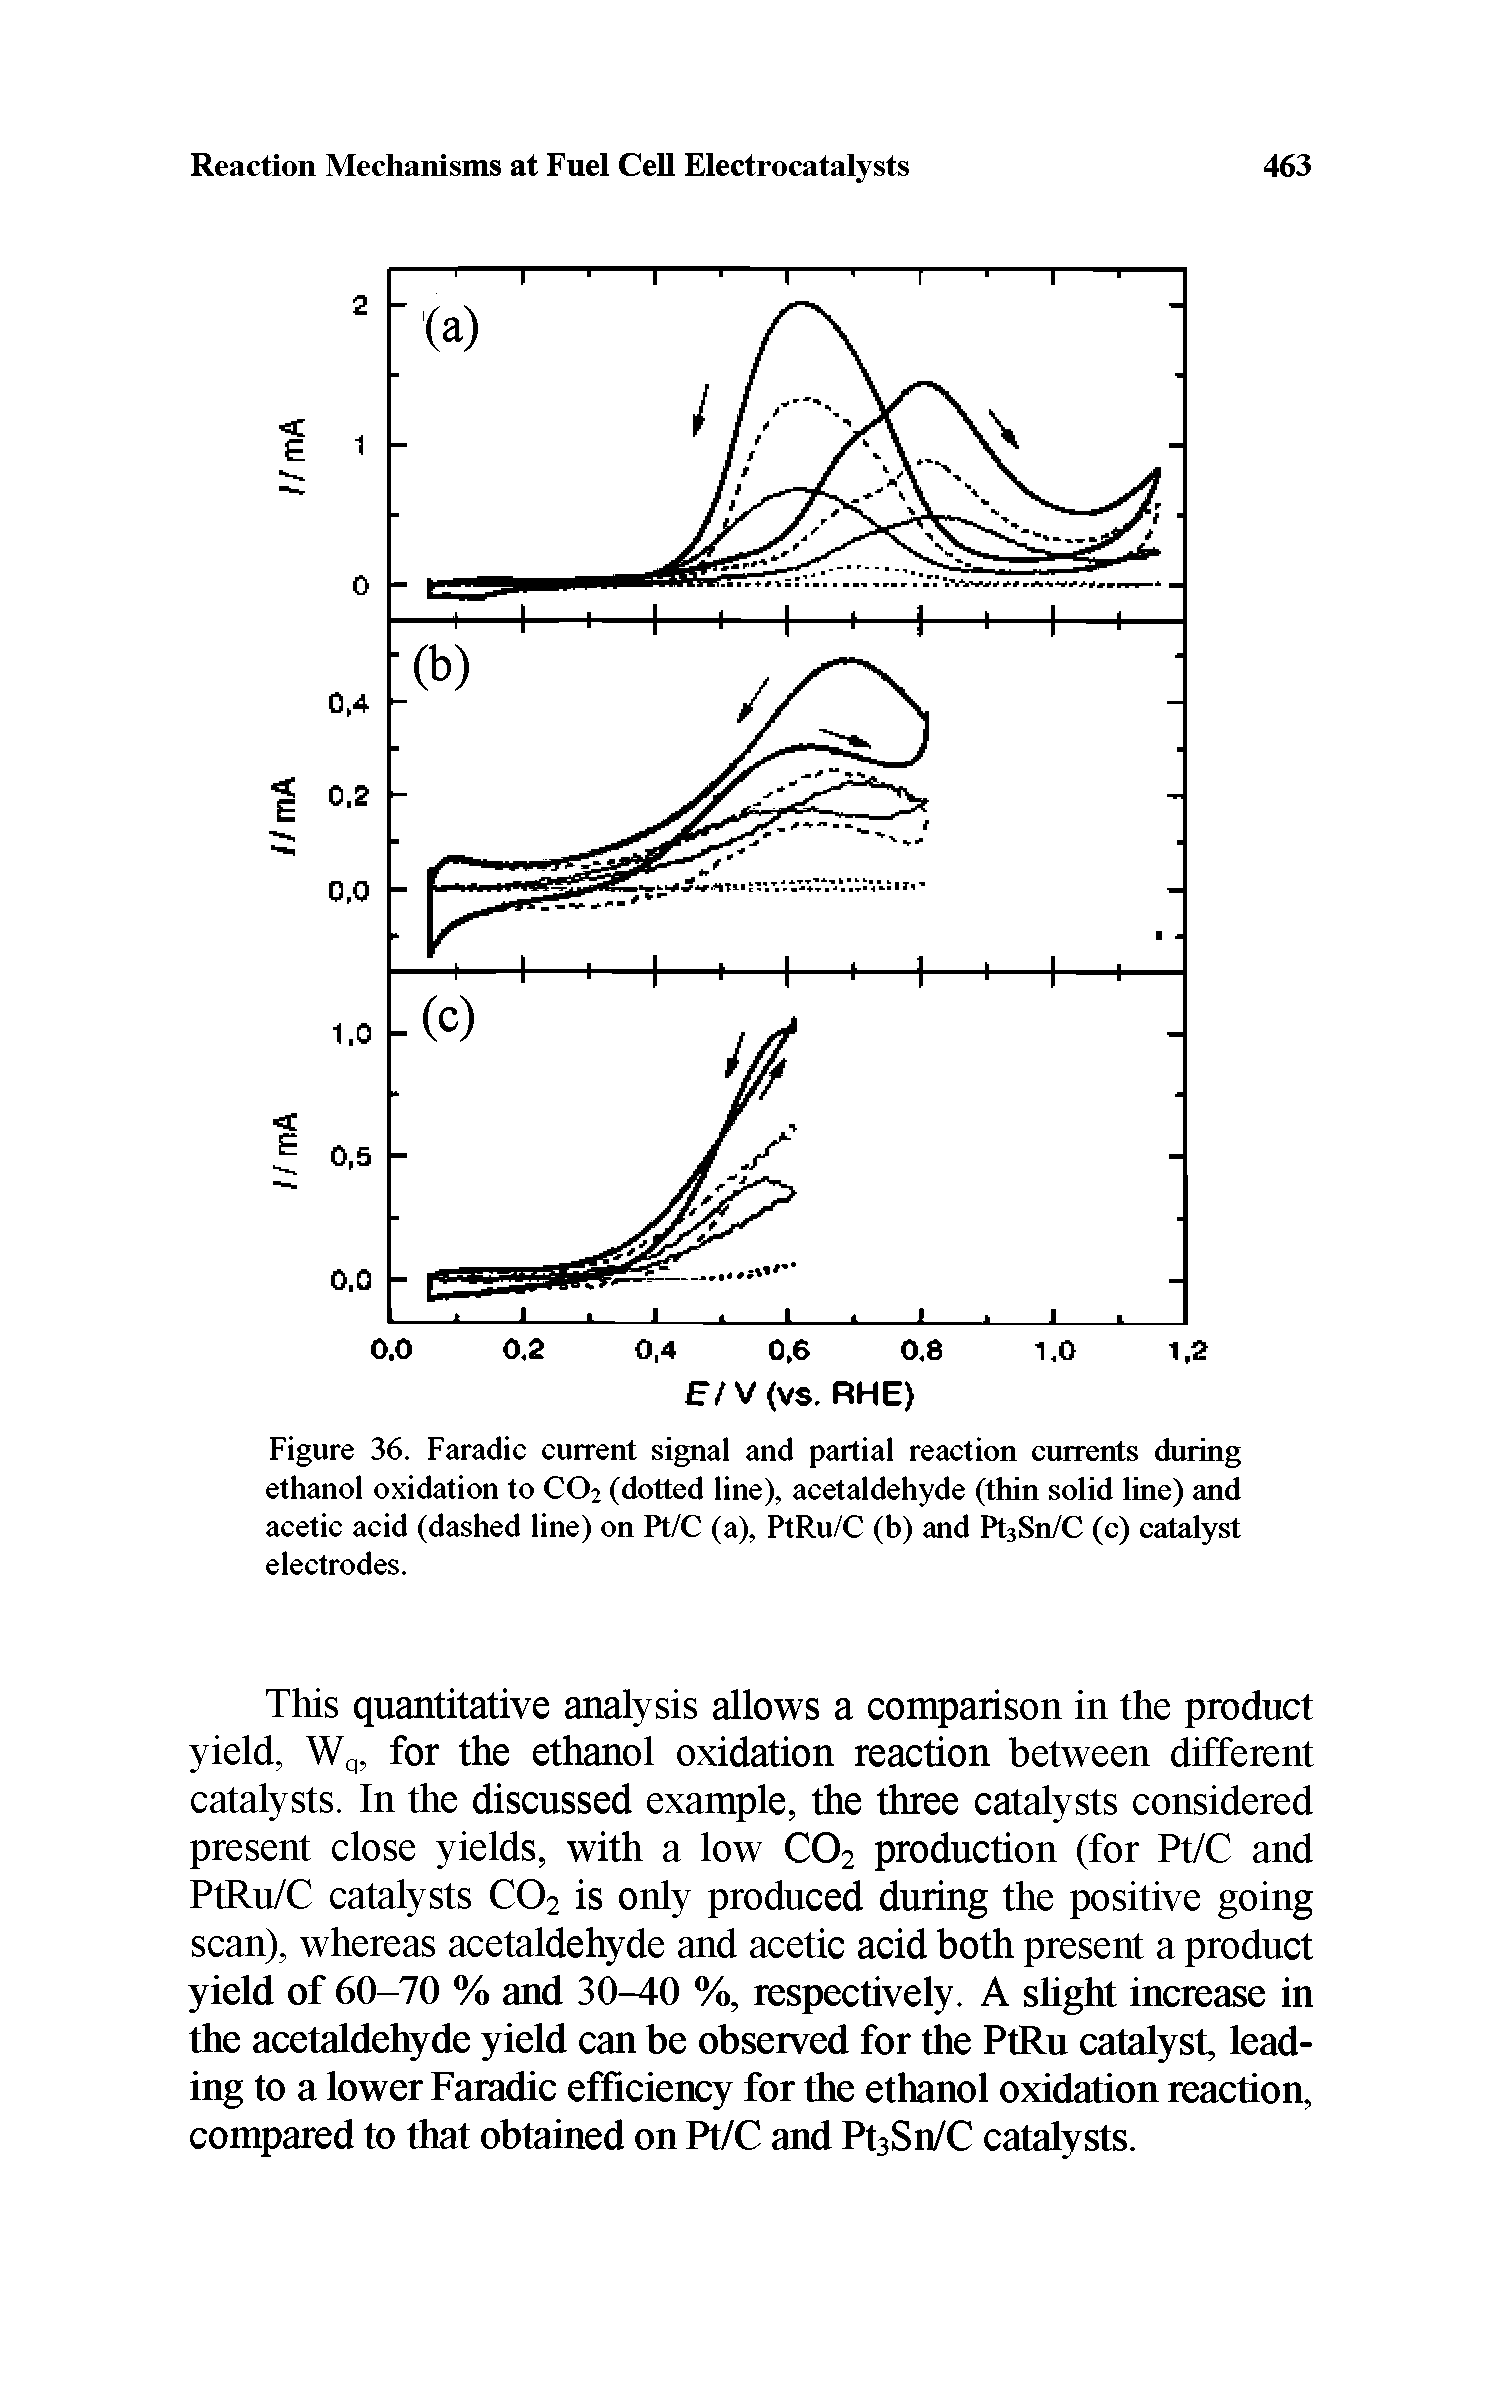 Figure 36. Faradic current signal and partial reaction currents during ethanol oxidation to CO2 (dotted line), acetaldehyde (thin solid line) and acetic acid (dashed line) on Pt/C (a), PtRu/C (b) and PtsSn/C (c) catalyst electrodes.